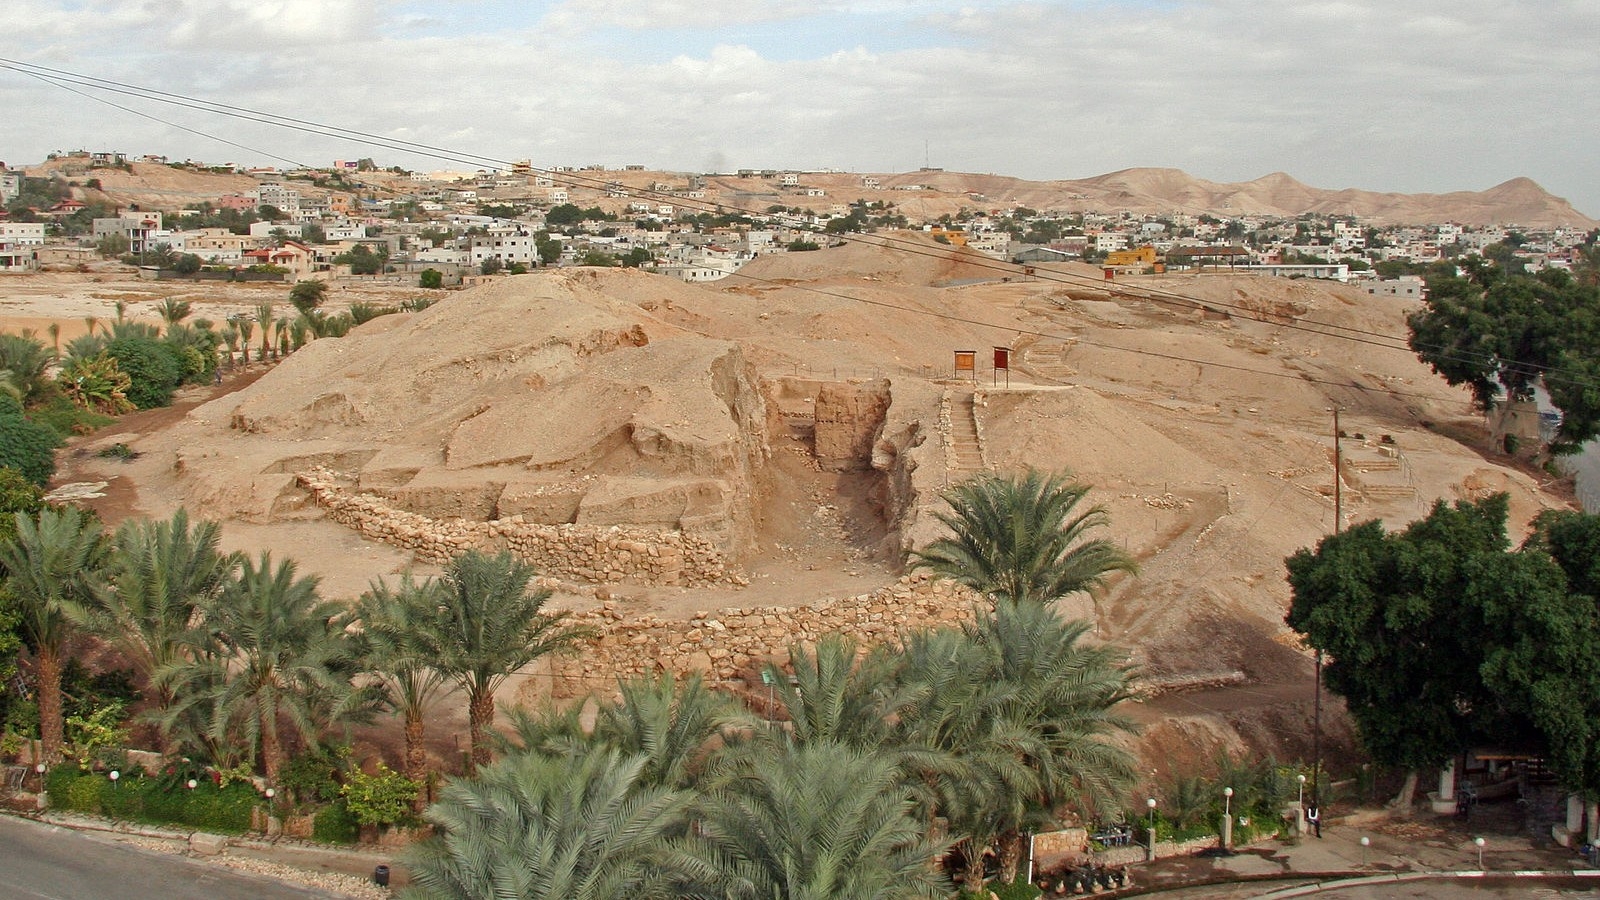 Tell al-Sultan has been added to the world heritage list (Wikimedia Commons)